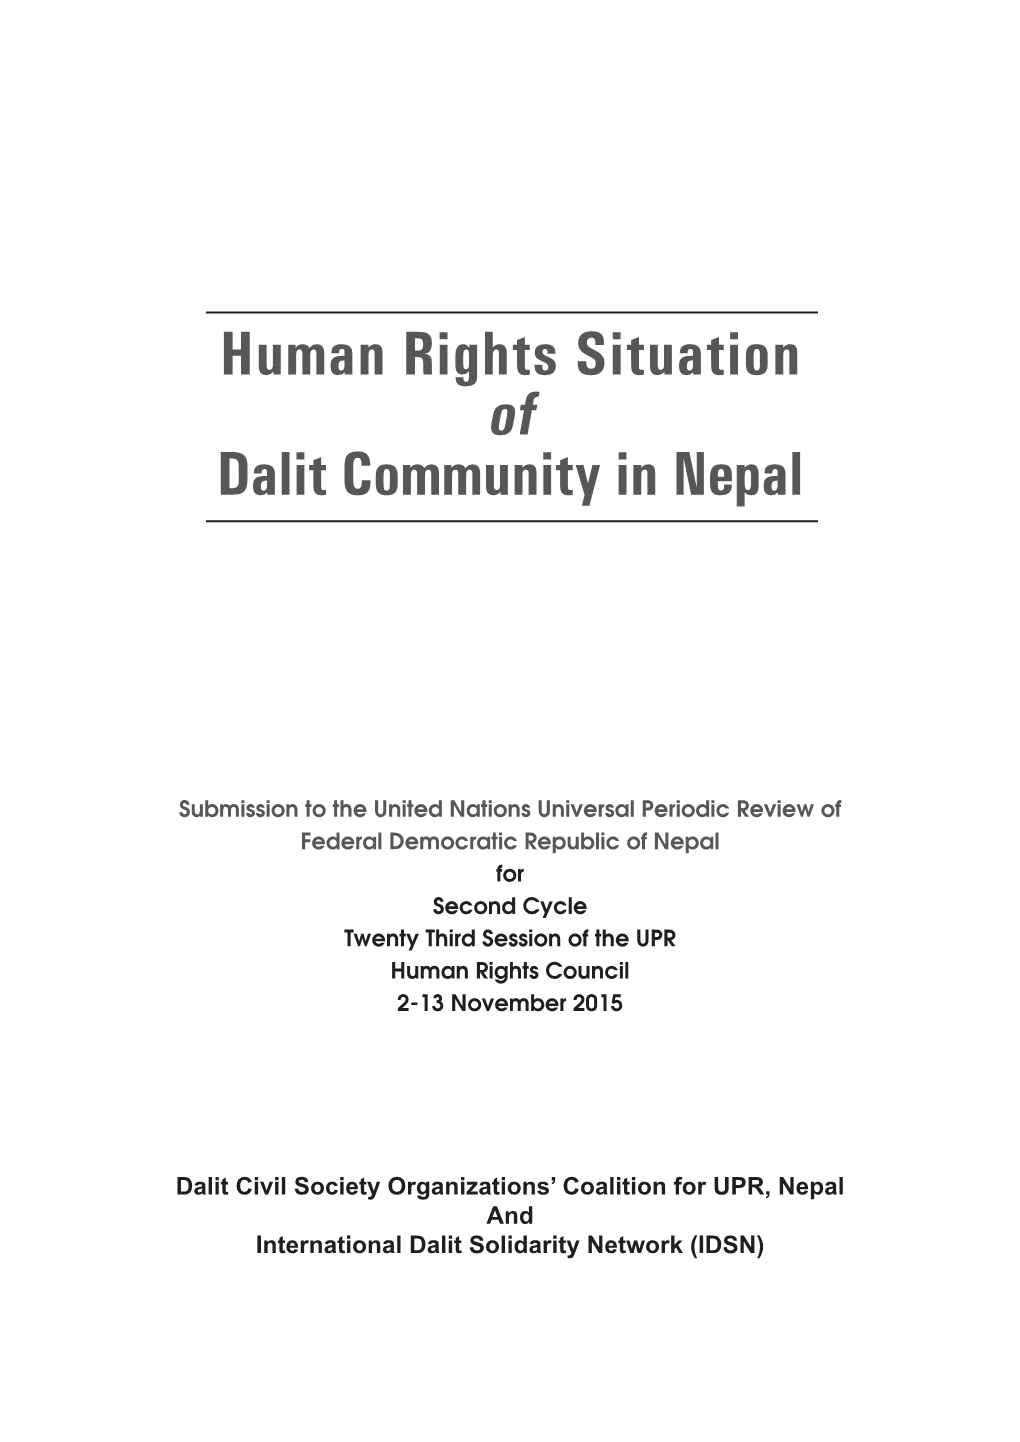 Human Rights Situation Dalit Community in Nepal